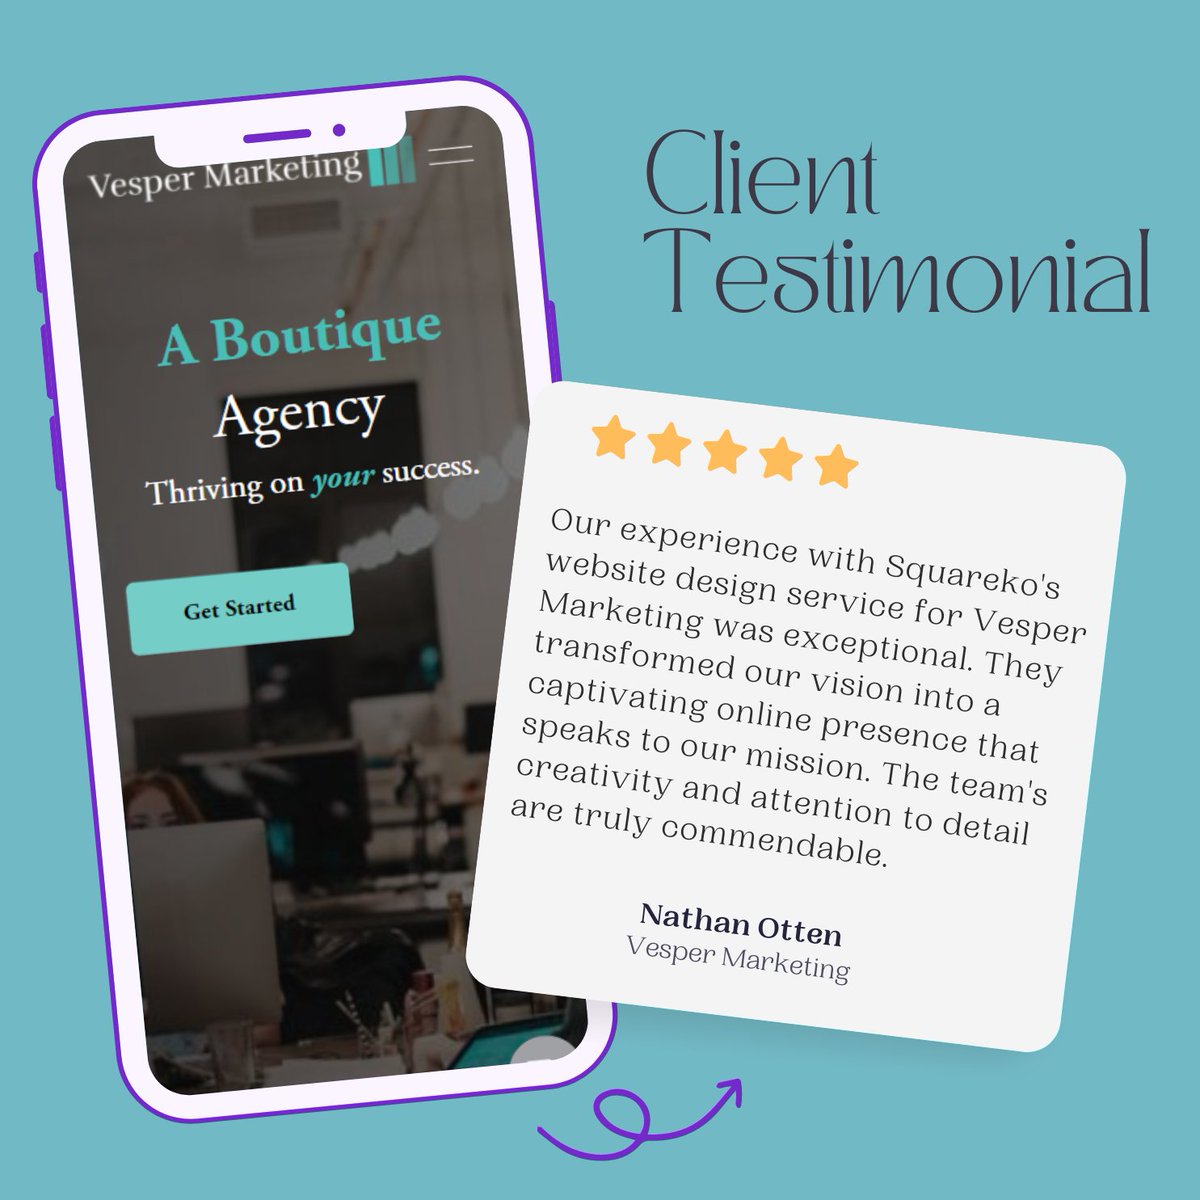 We've just finished working on the 'Vesper Marketing' website, and it's been great to see positive feedback from the founder, Nathan Otten. We appreciate the trust you've placed in us for your project.
#Squarespace #CustomSquarespaceWebsite #Clienttestimonial #AgencyWebsite